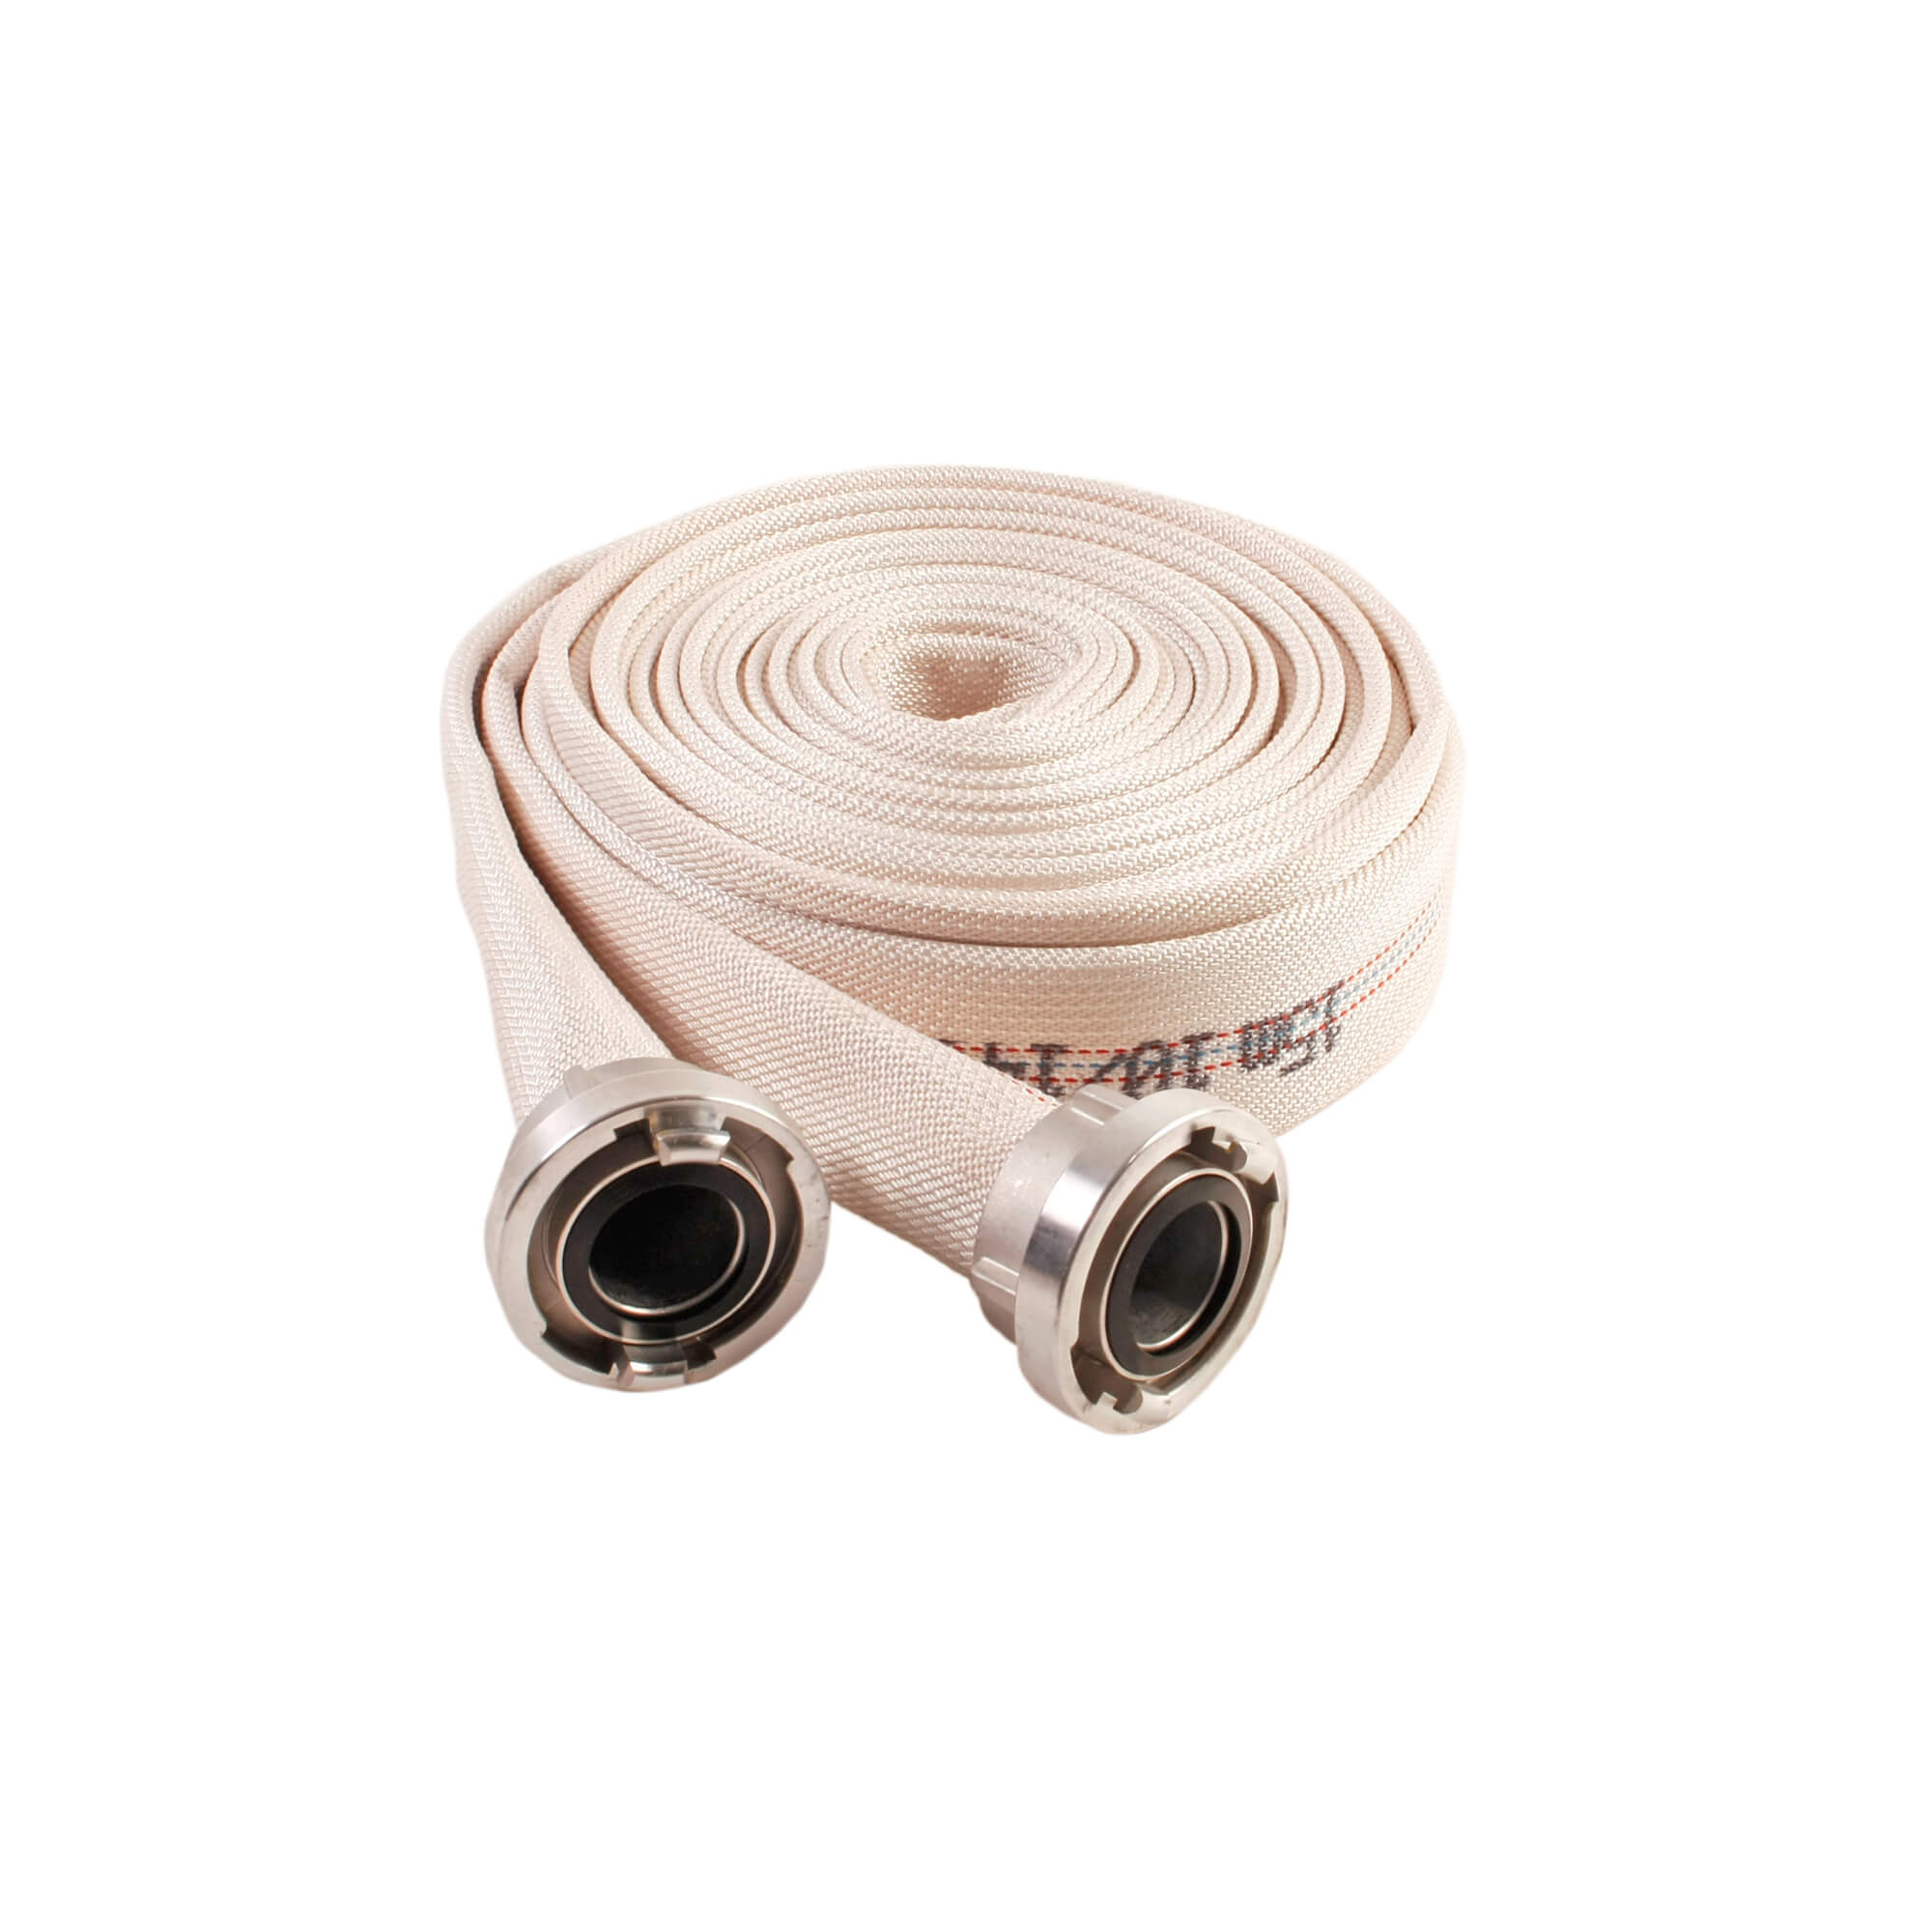 Fire Pressure Hose 52 mm with couplings